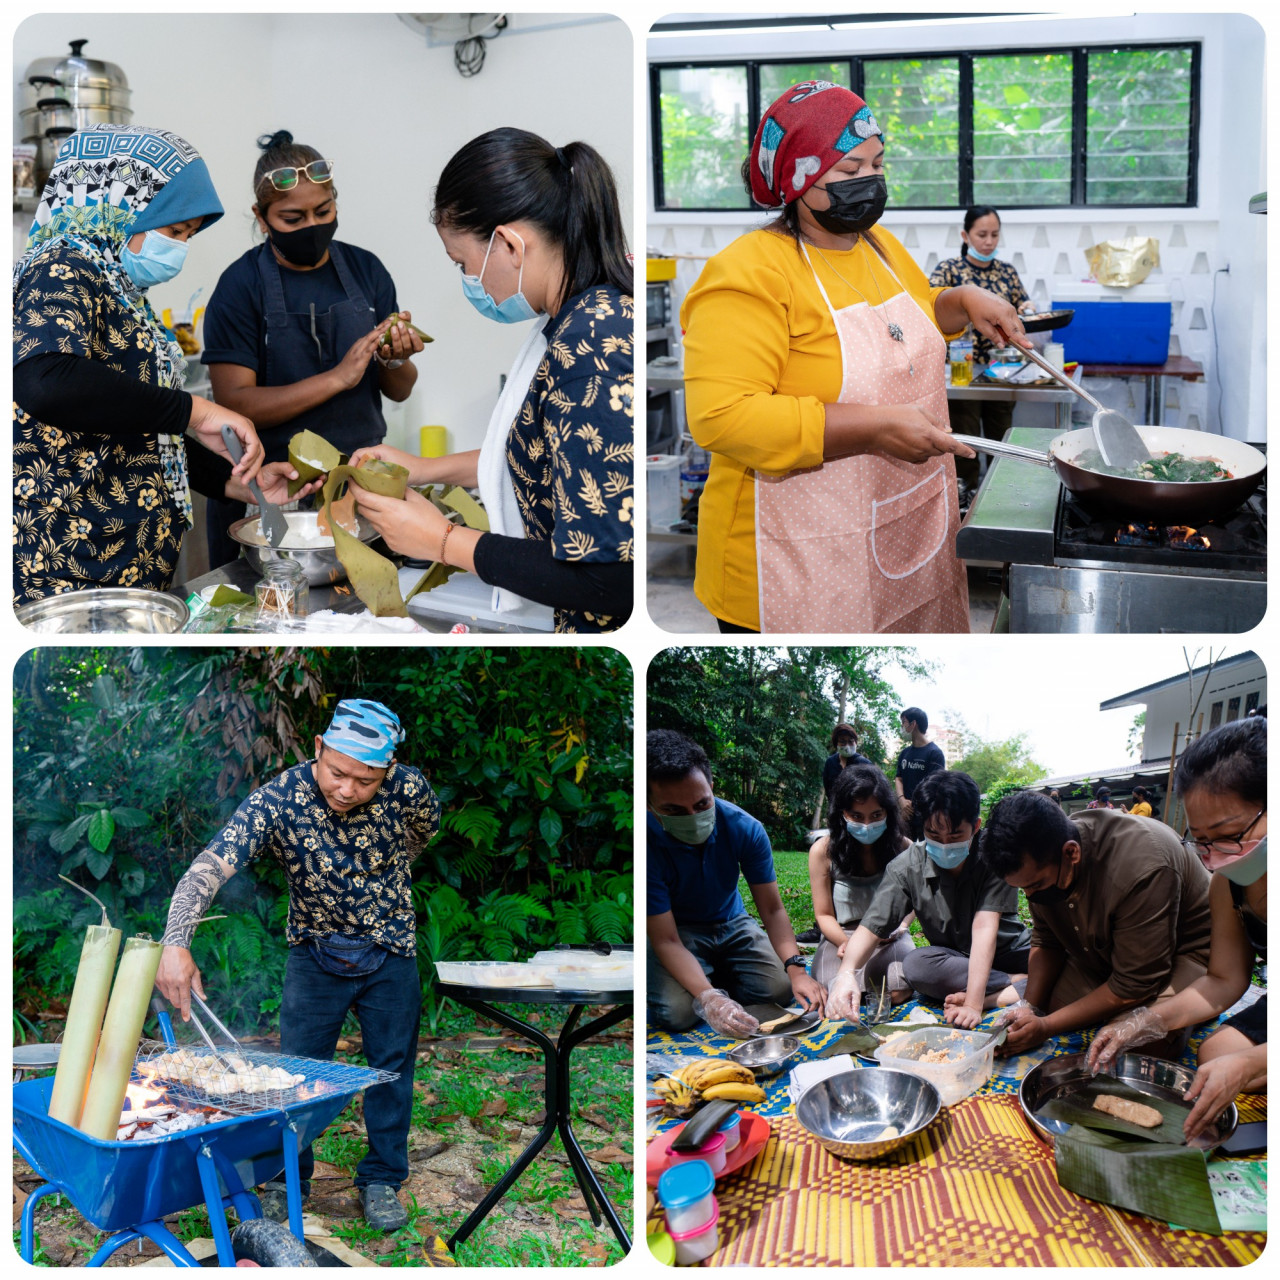 Some of the preparation and cooking that goes behind making Orang Asli food. In the bottom right, guests try their hands at making a type of kuih lopis. – Pics courtesy of Native Discovery